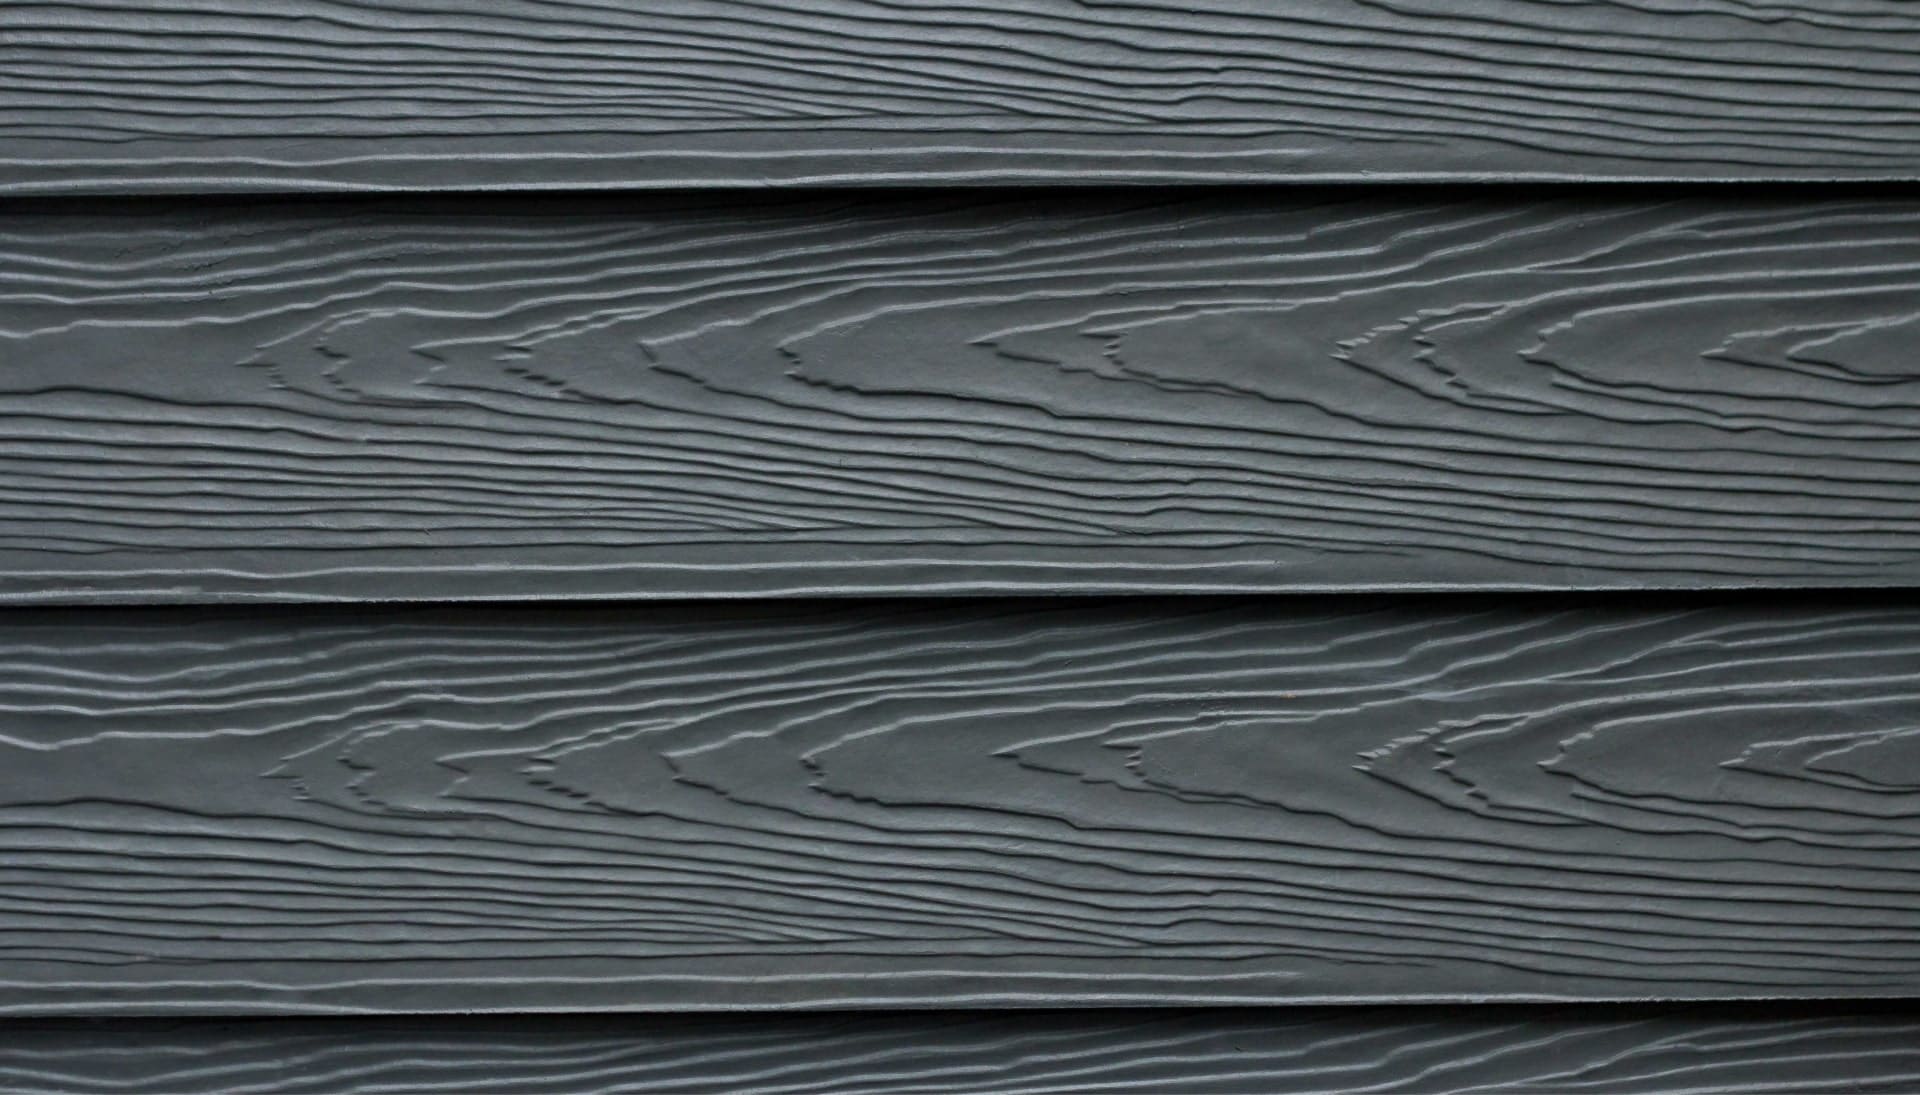 fiber cement siding is a great option for your home siding in Richmond, Virginia.